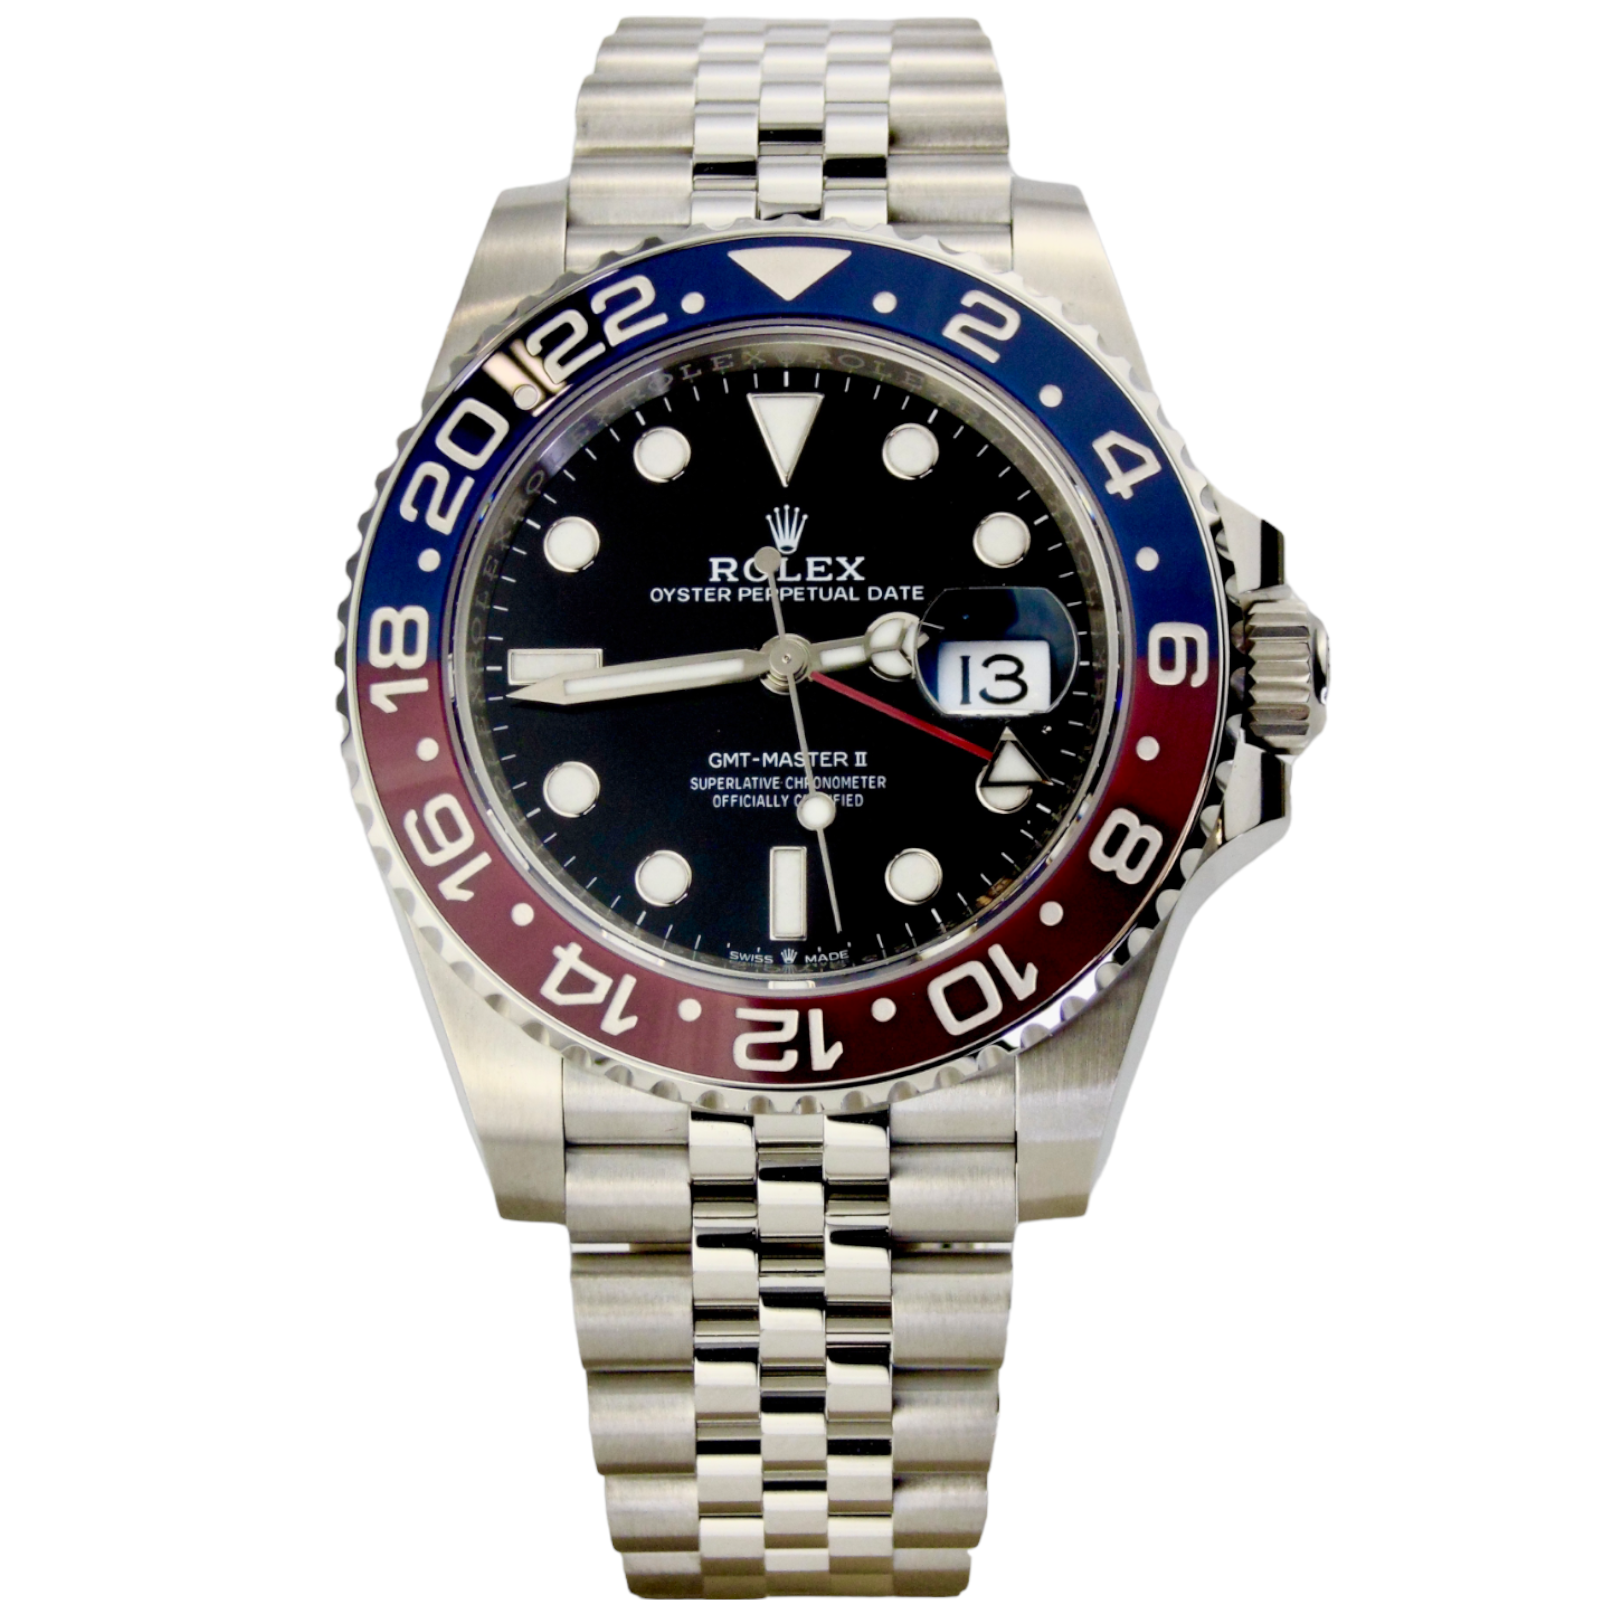 Rolex Submariner Black Date 2022 - Wilkinsons Jewellery and Watches